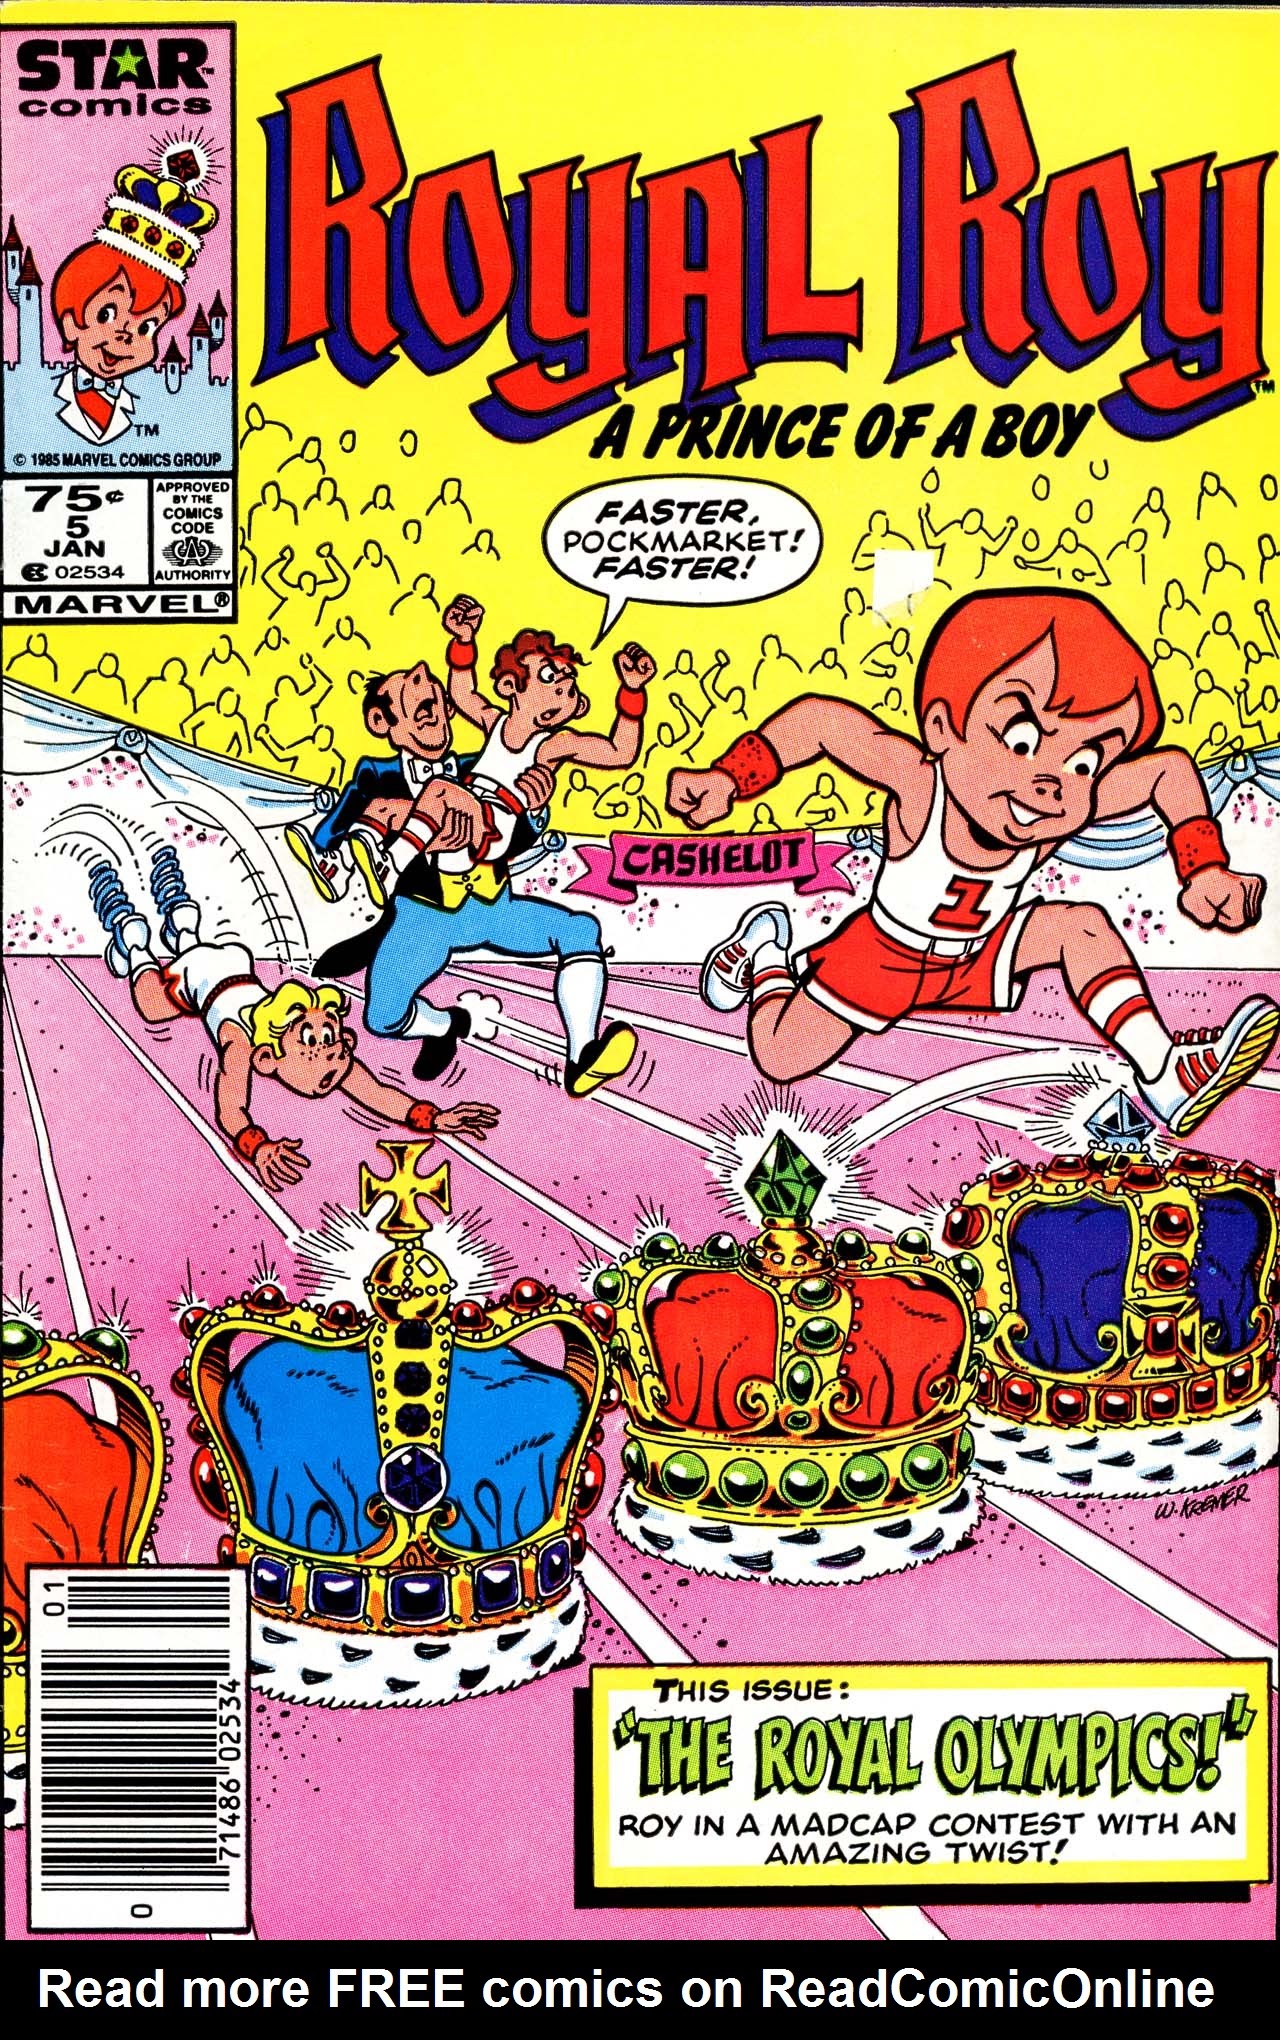 Read online Royal Roy comic -  Issue #5 - 1